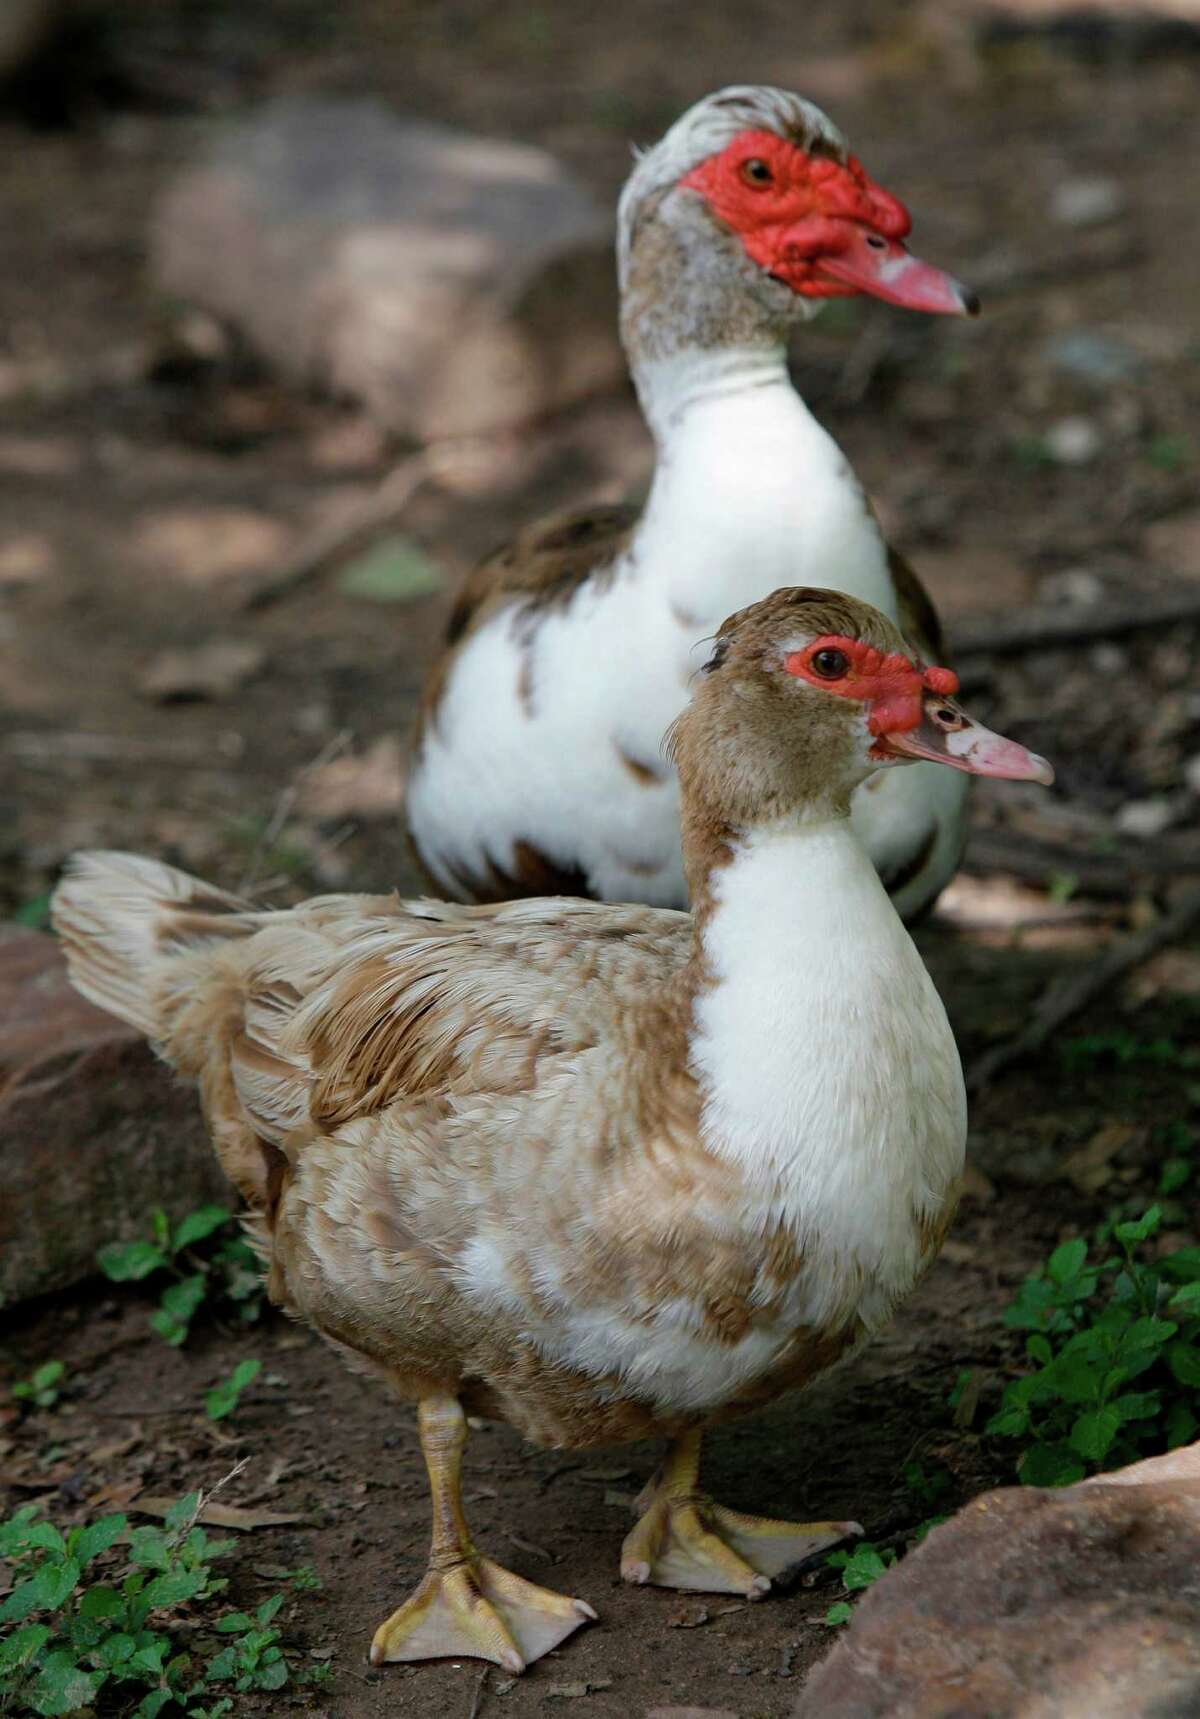 The city of Pearland is encouraging residents to destroy Muscovy ducks within its legal parameters to help address the growing problem of the aggressive species' expansion into the city. ( Melissa Phillip / Houston Chronicle )